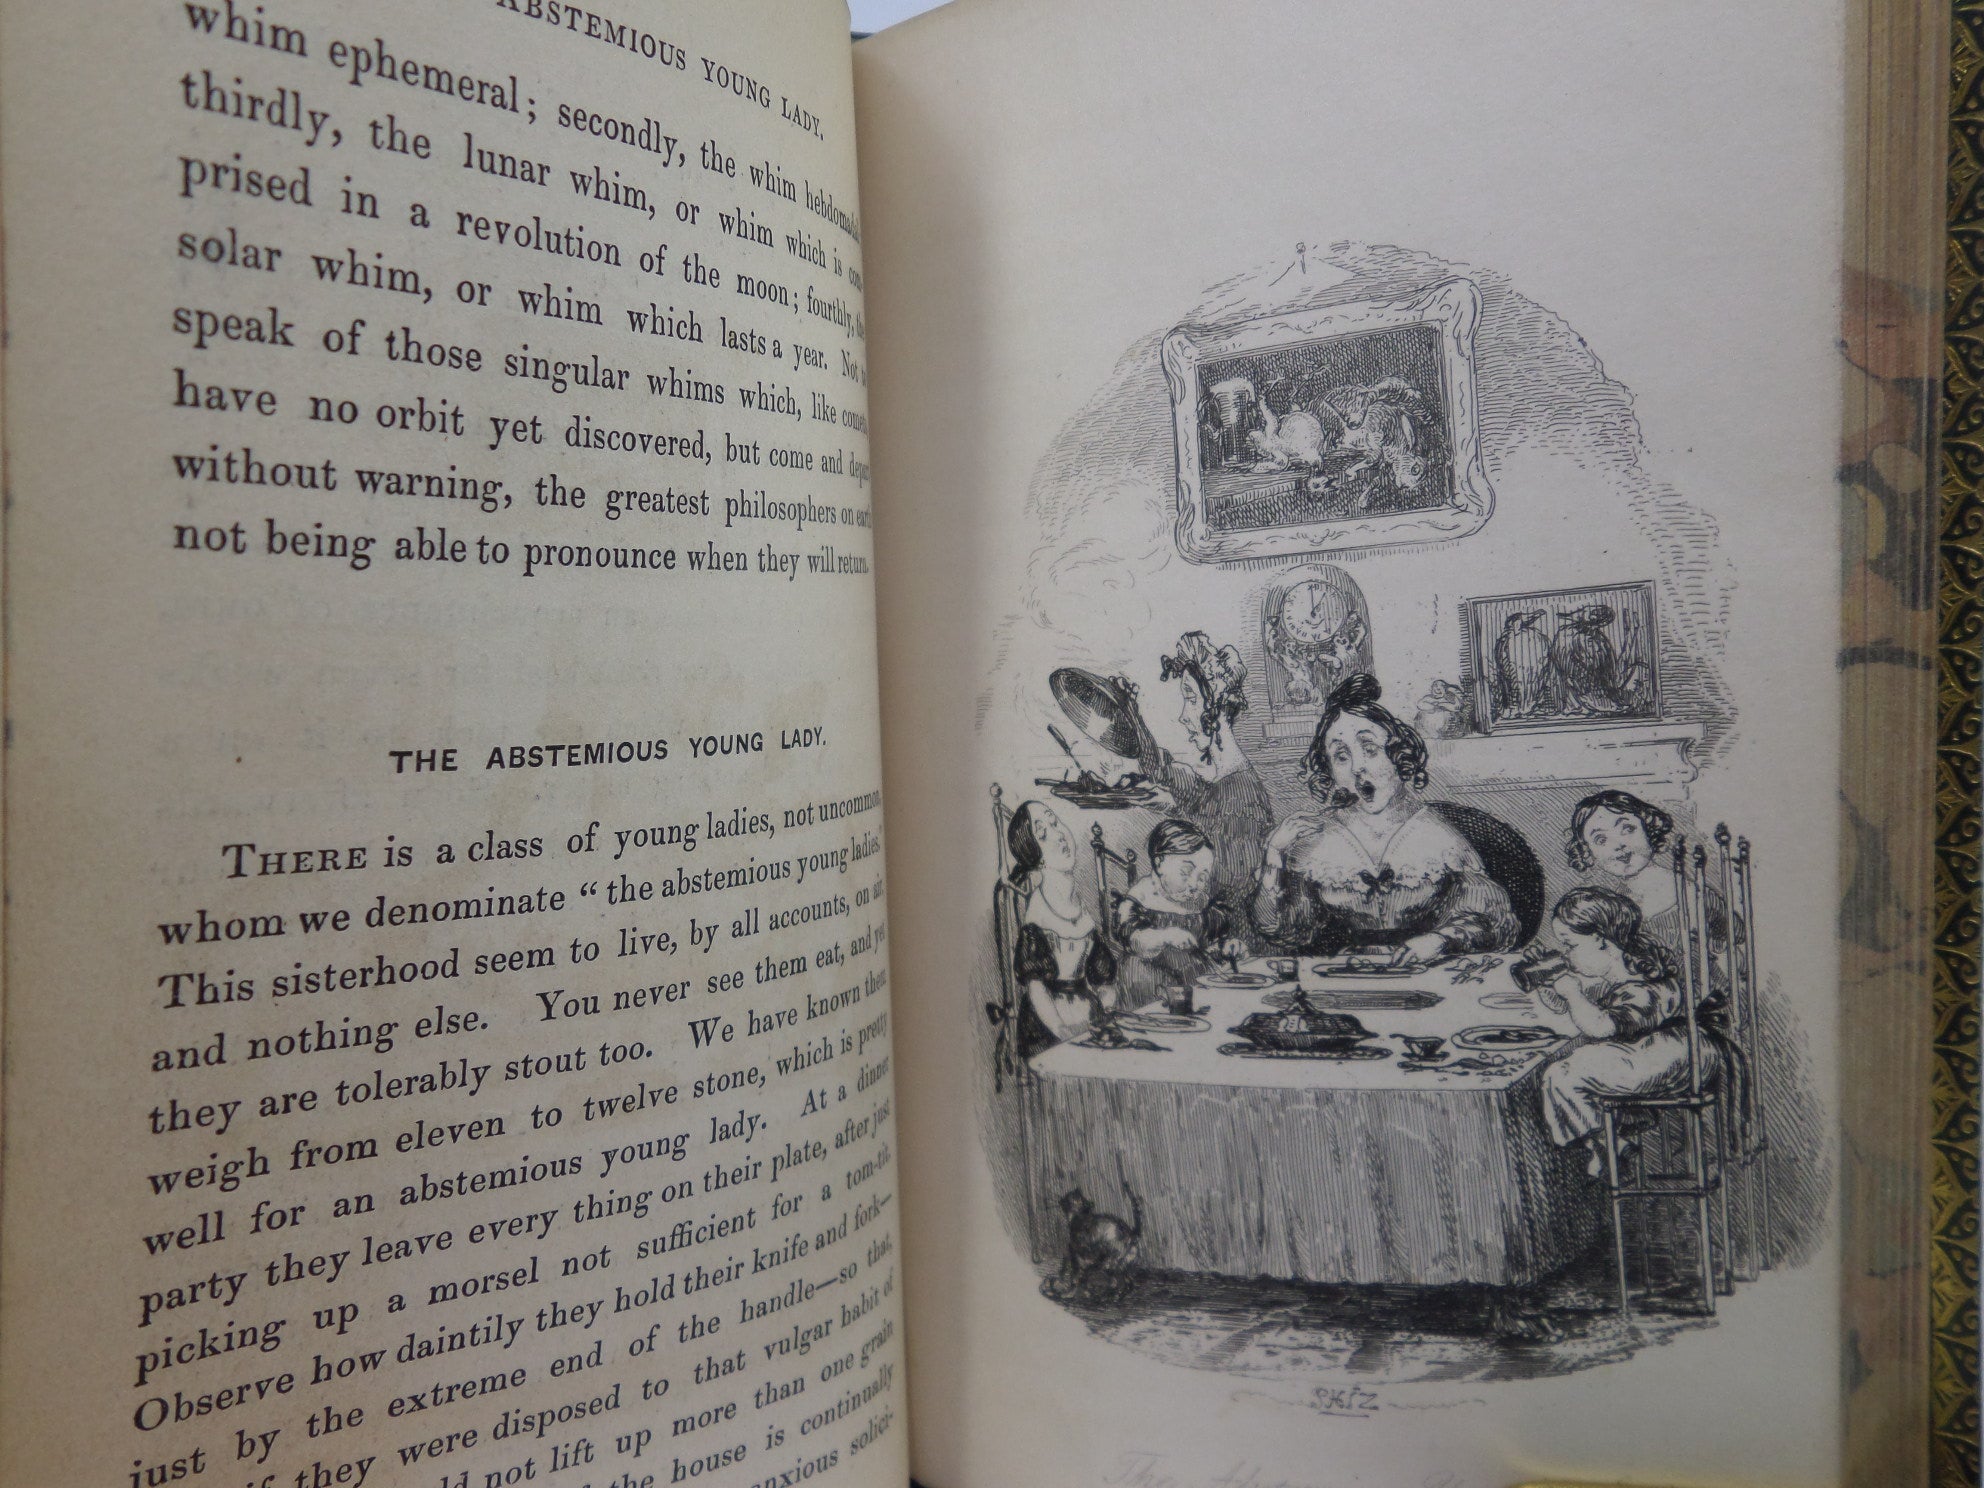 SKETCHES OF YOUNG LADIES & YOUNG GENTLEMEN 1837-1838 FINE LEATHER BINDING